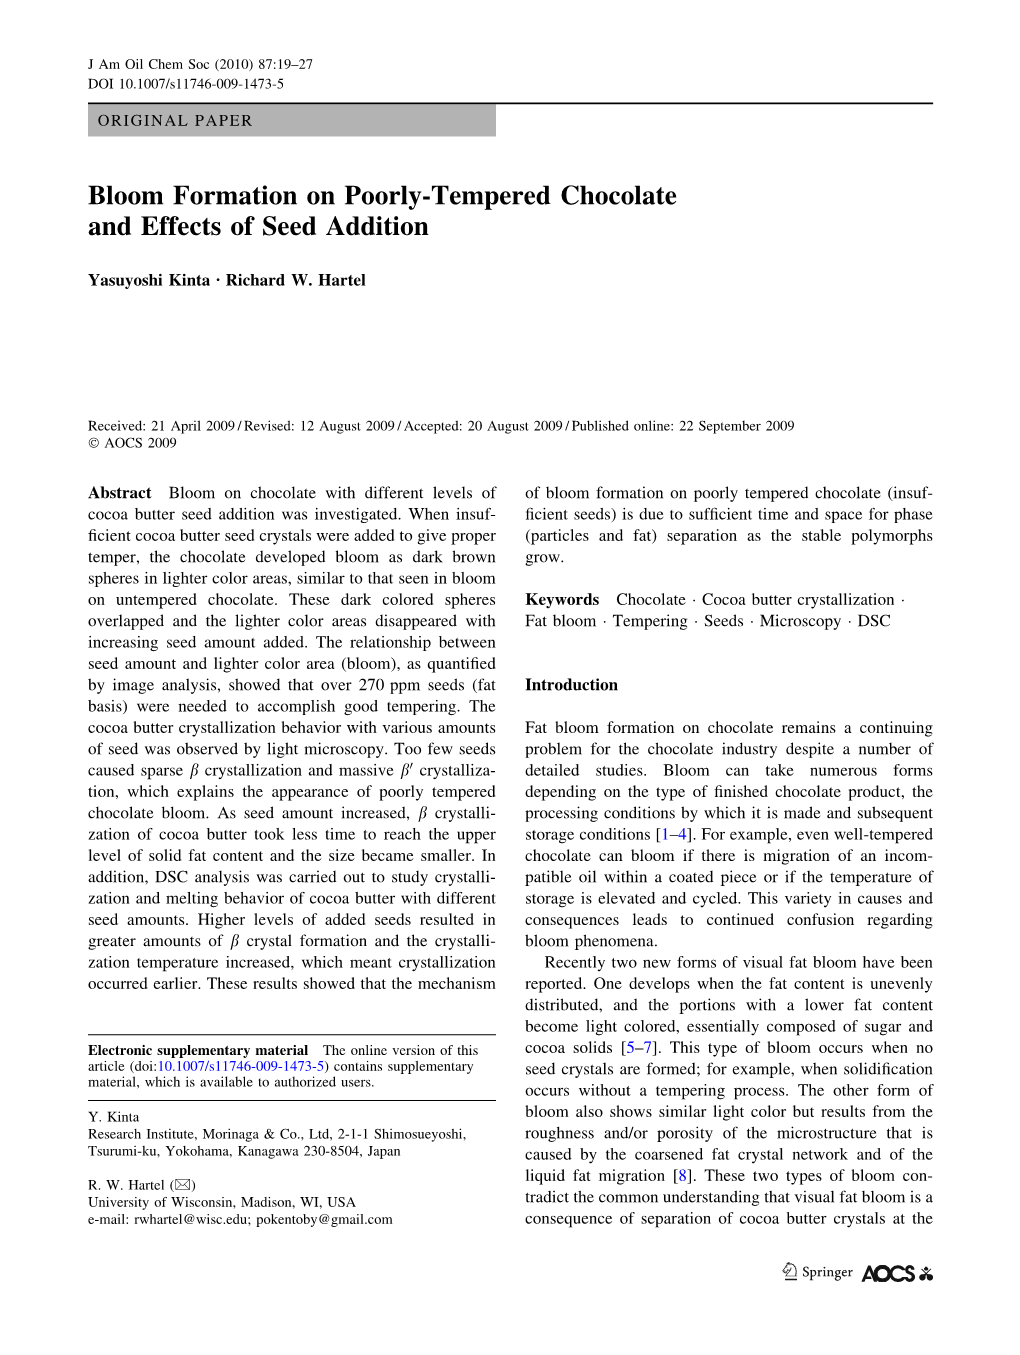 Bloom Formation on Poorly-Tempered Chocolate and Effects of Seed Addition